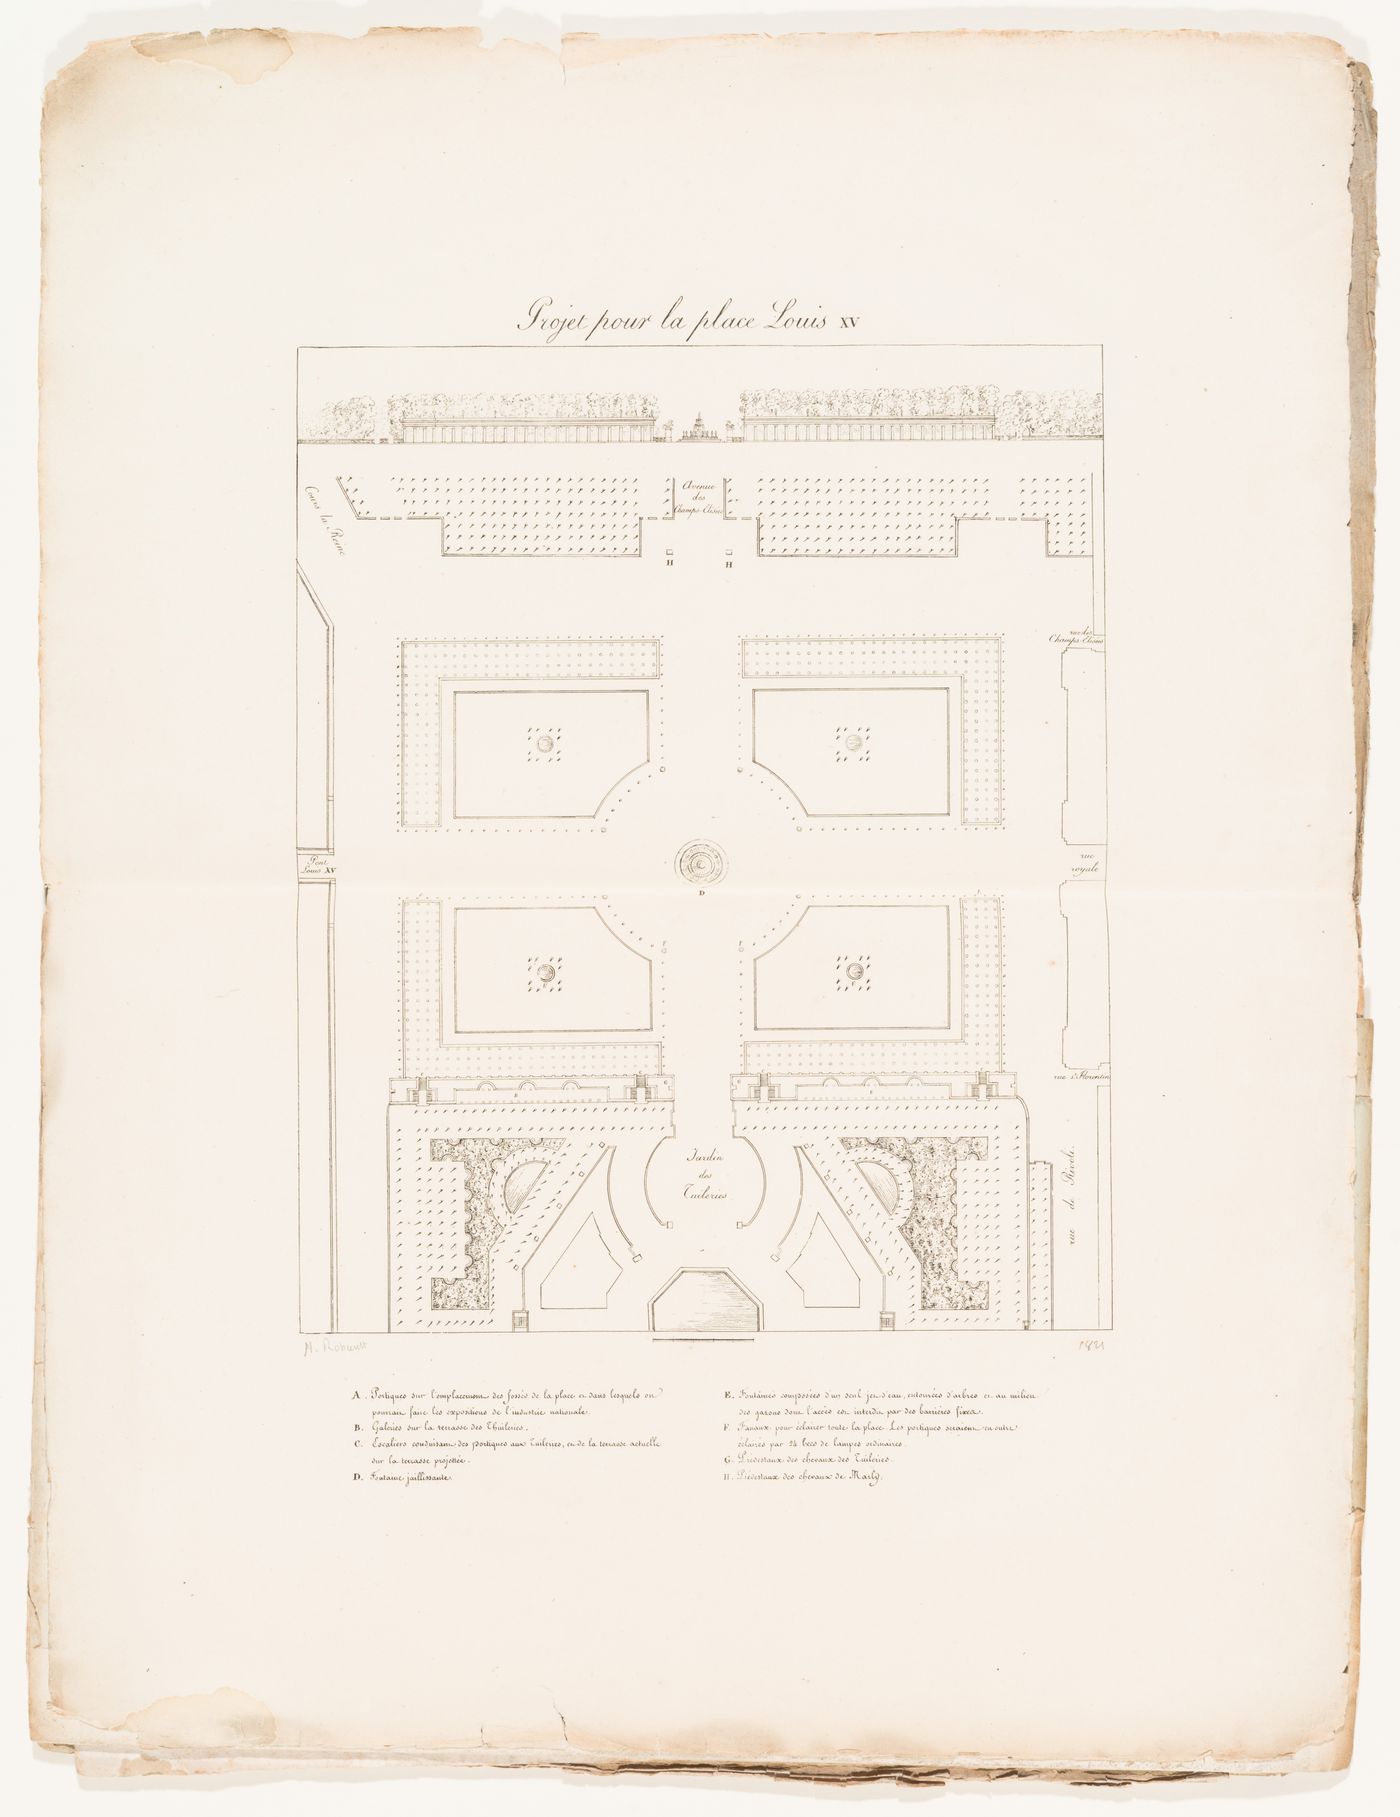 Plan and elevation for place Louis XV with five fountains, freestanding colonnades and loggias